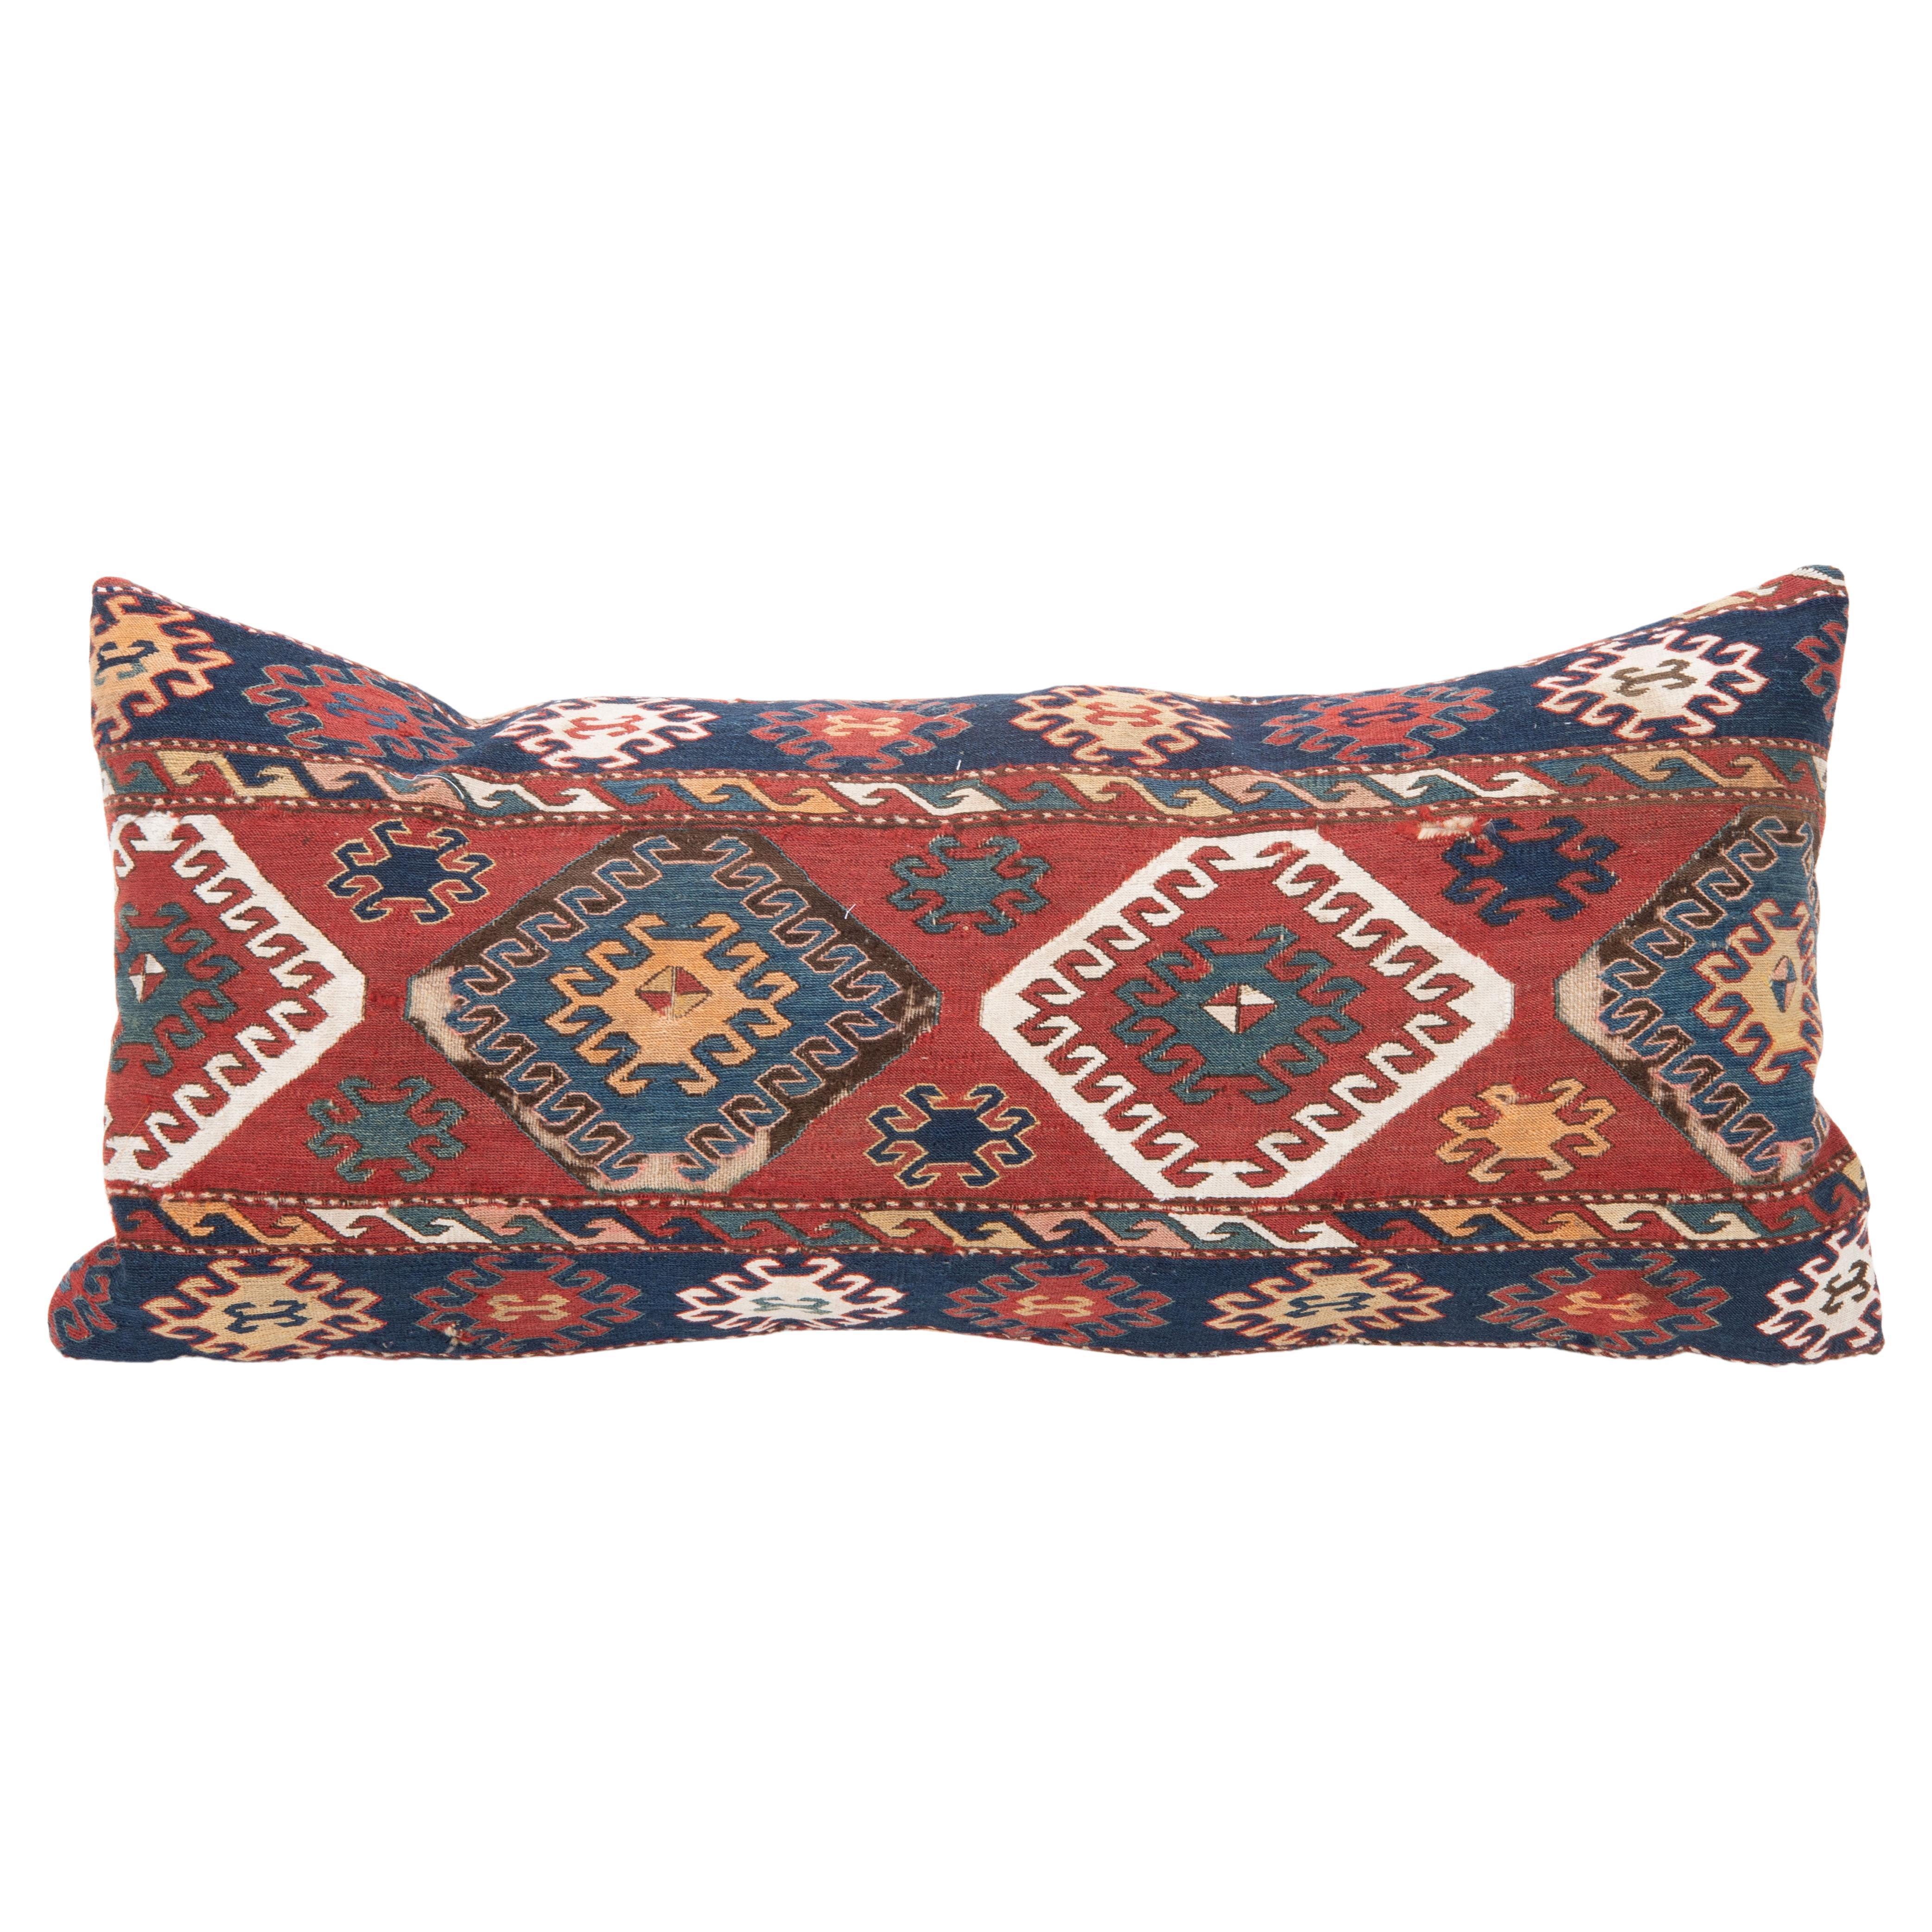 Pillow Cover Made from an Antique Caucasian Sumak Mafrash ( storage Bag ) Panel For Sale